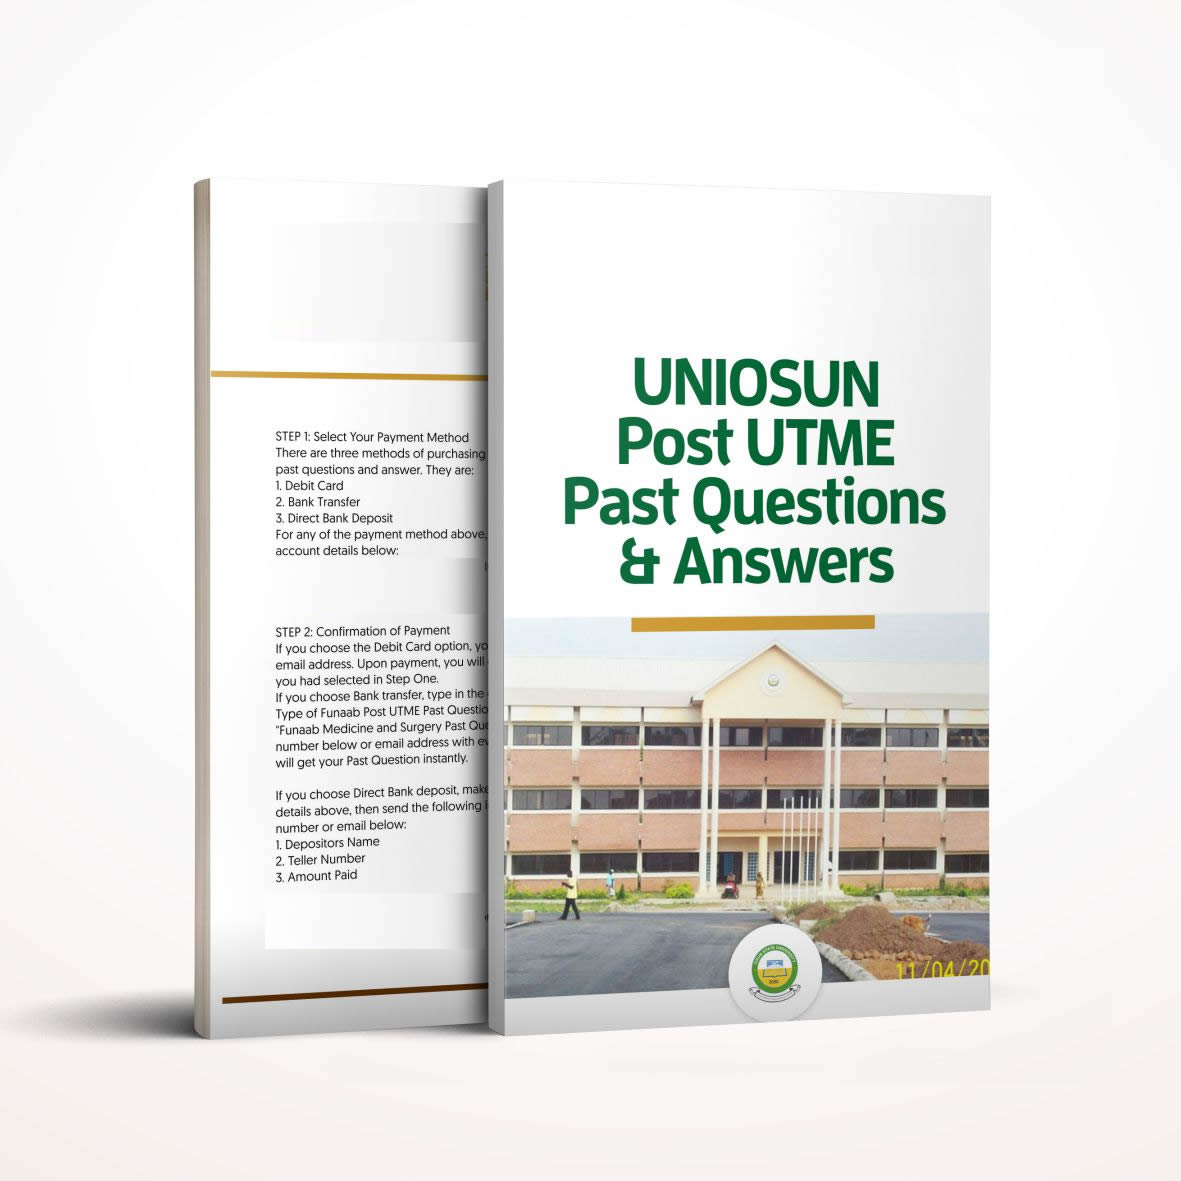 UNIOSUN Post UTME past questions and answers